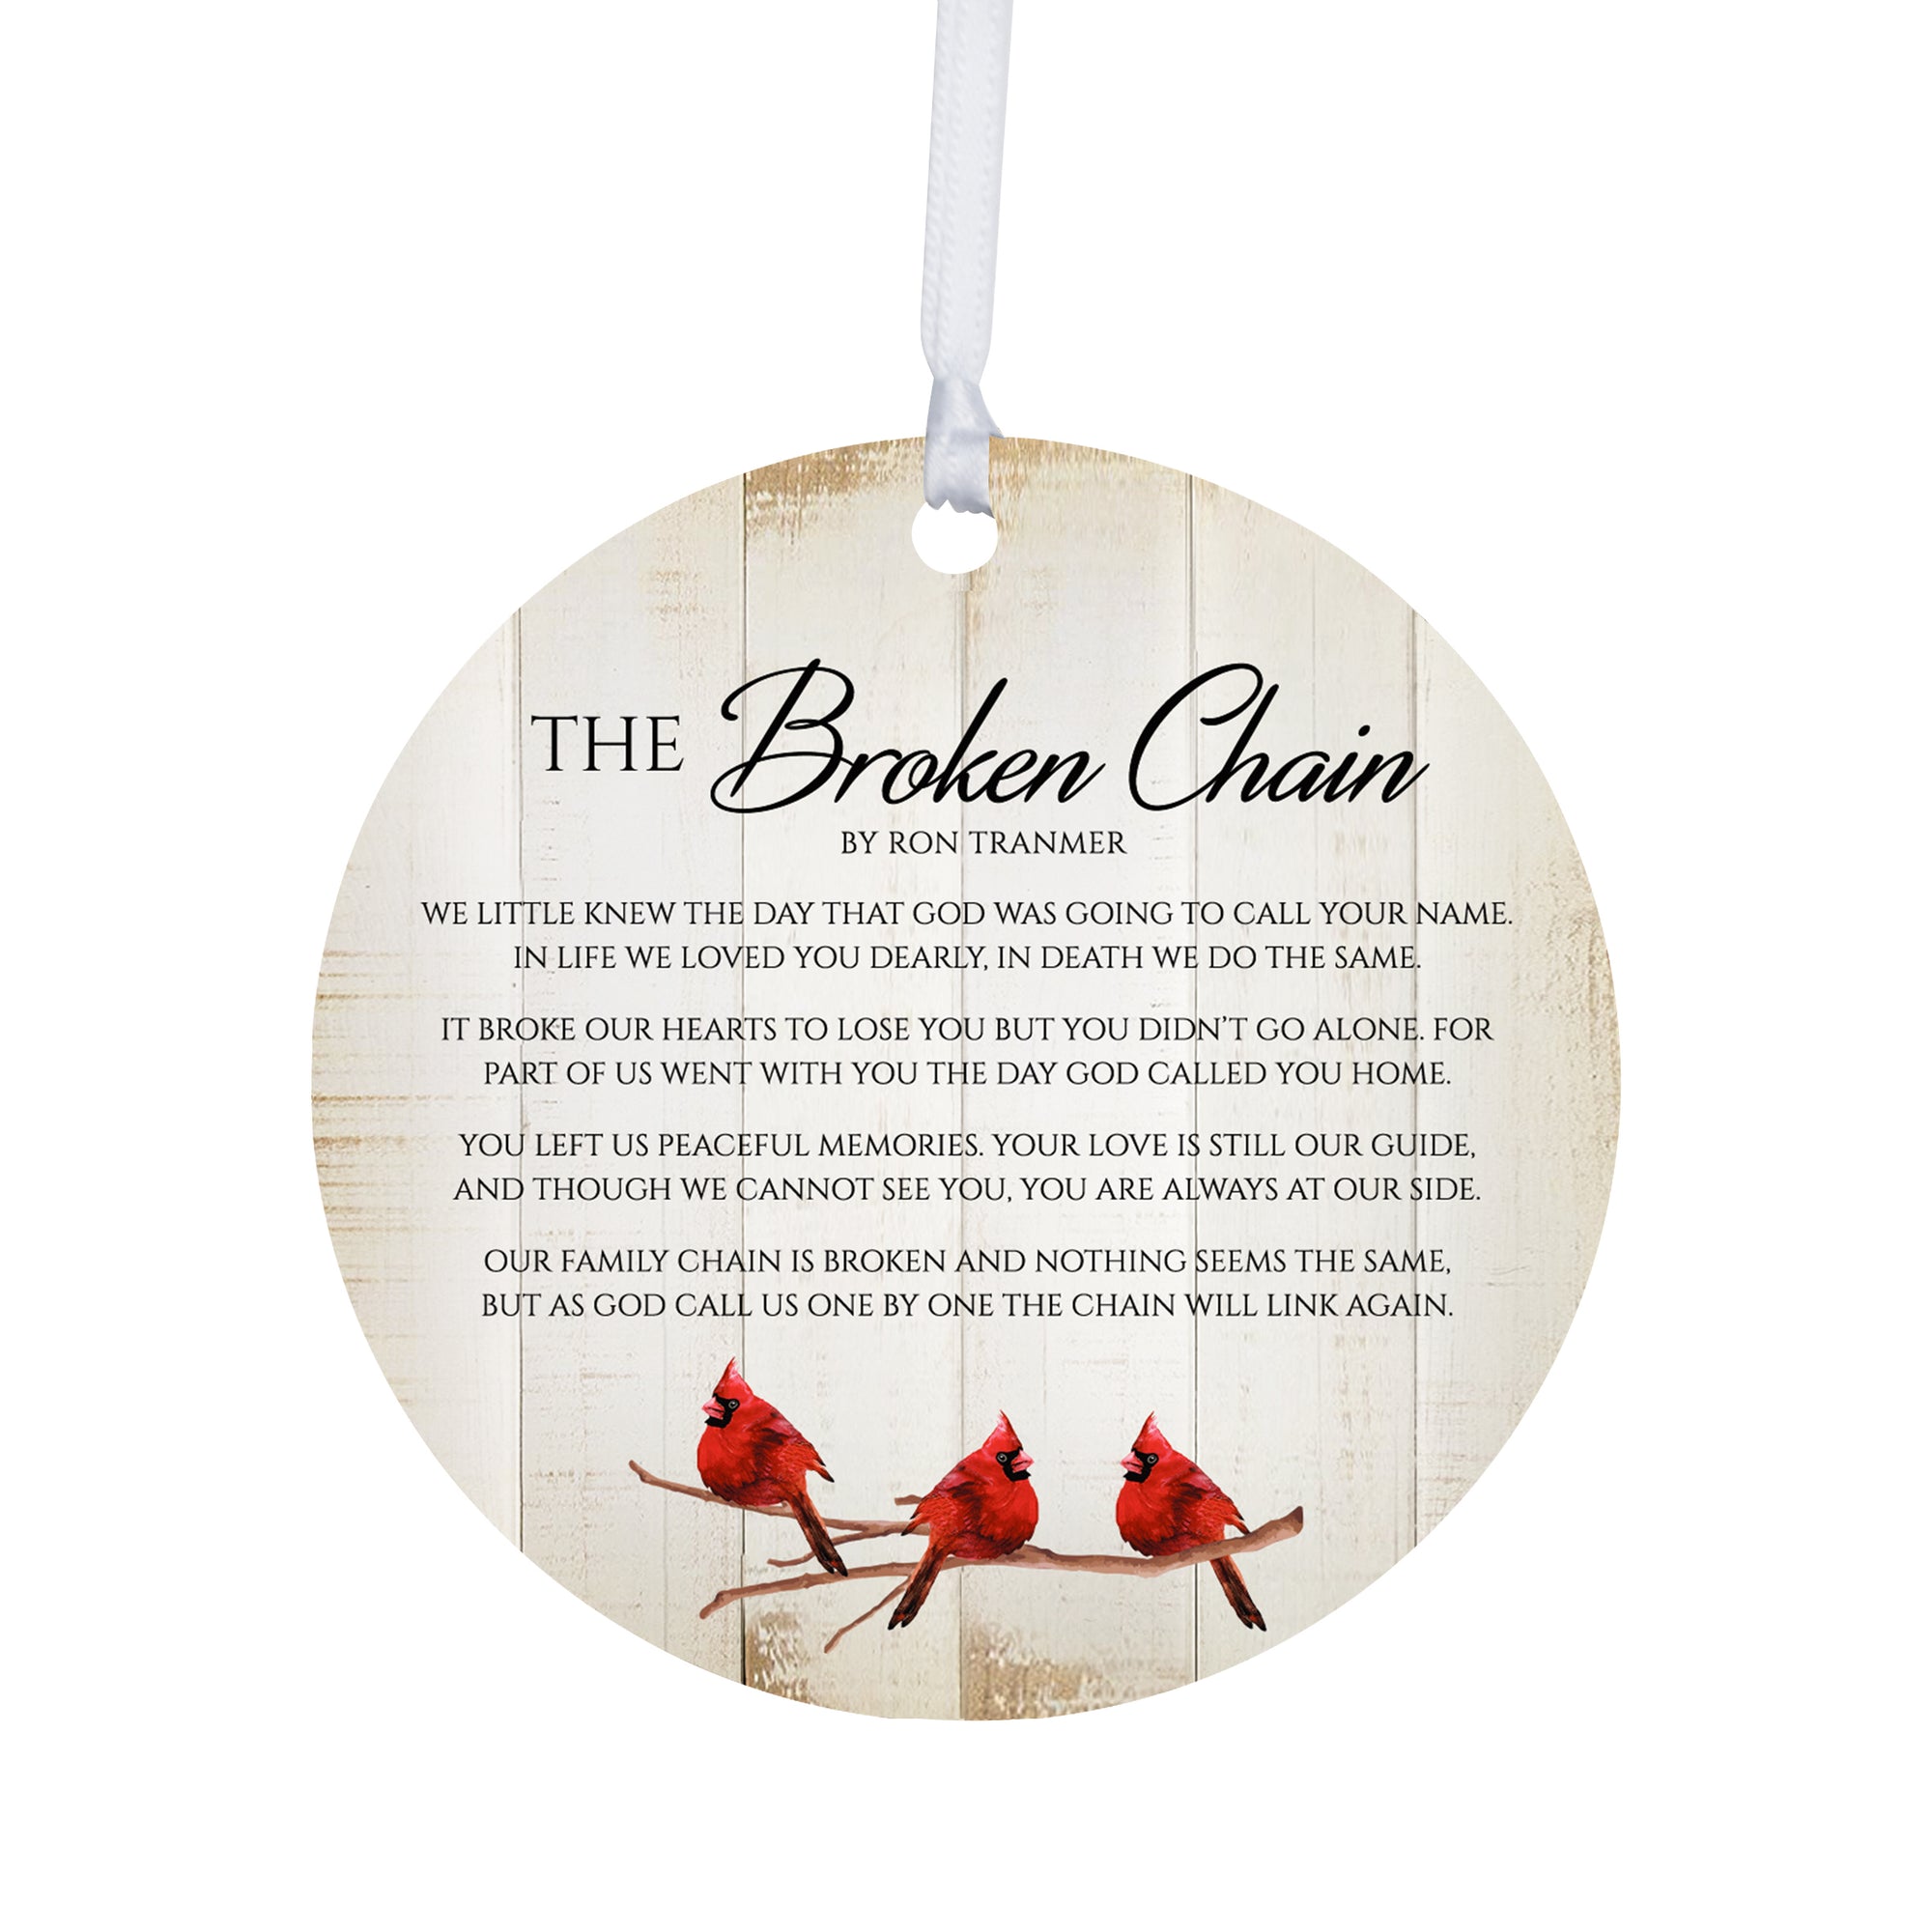 Vintage-Inspired Cardinal Ornament With Everyday Verses Gift Ideas - The Broken Chain